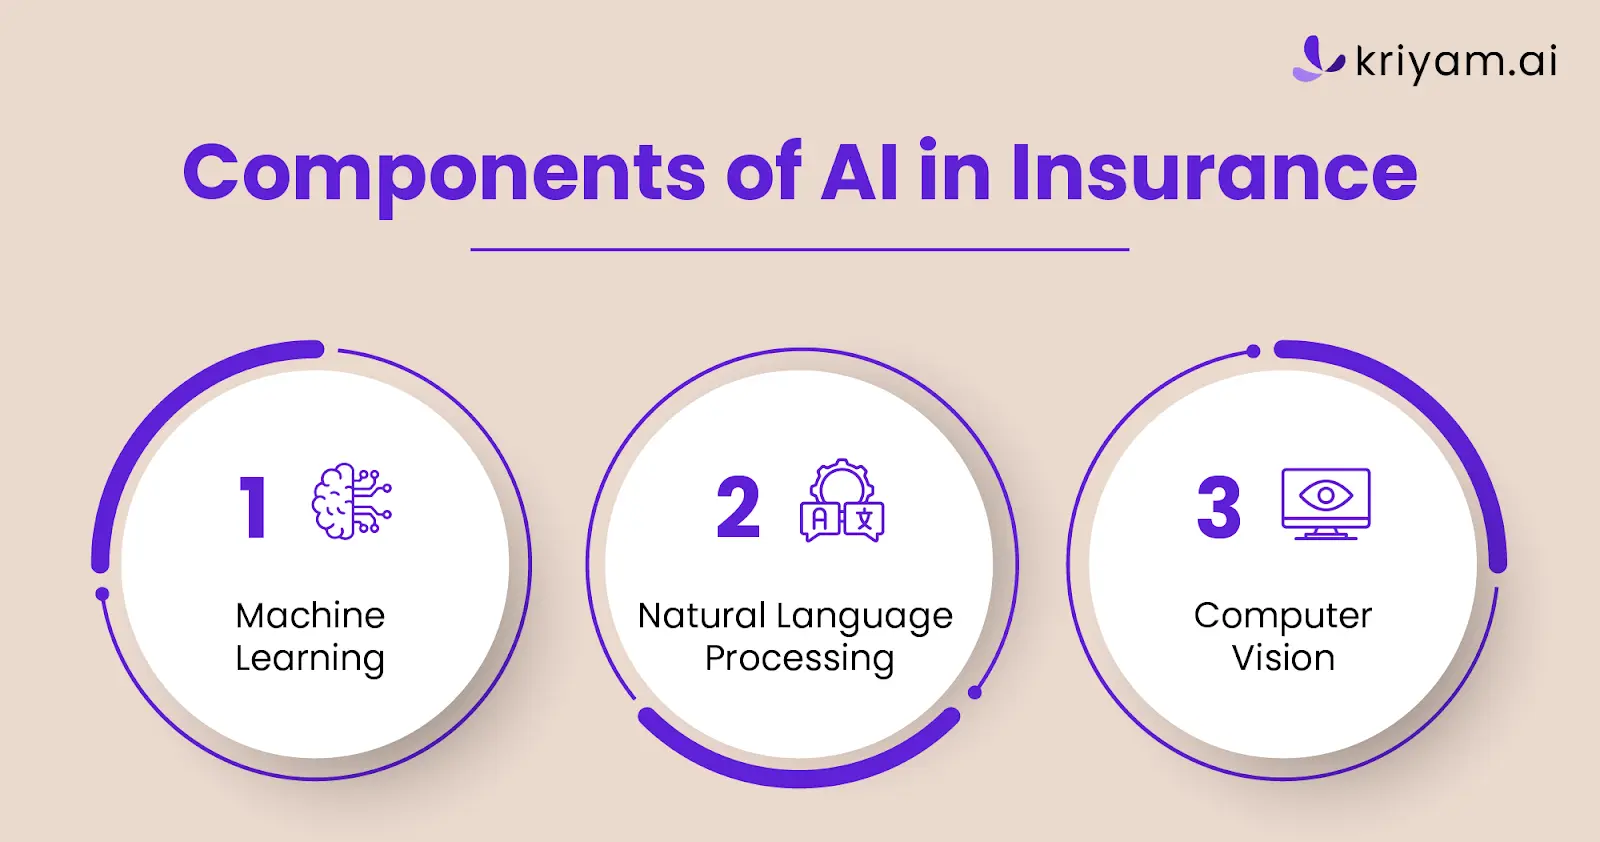 Components of AI in Insurance